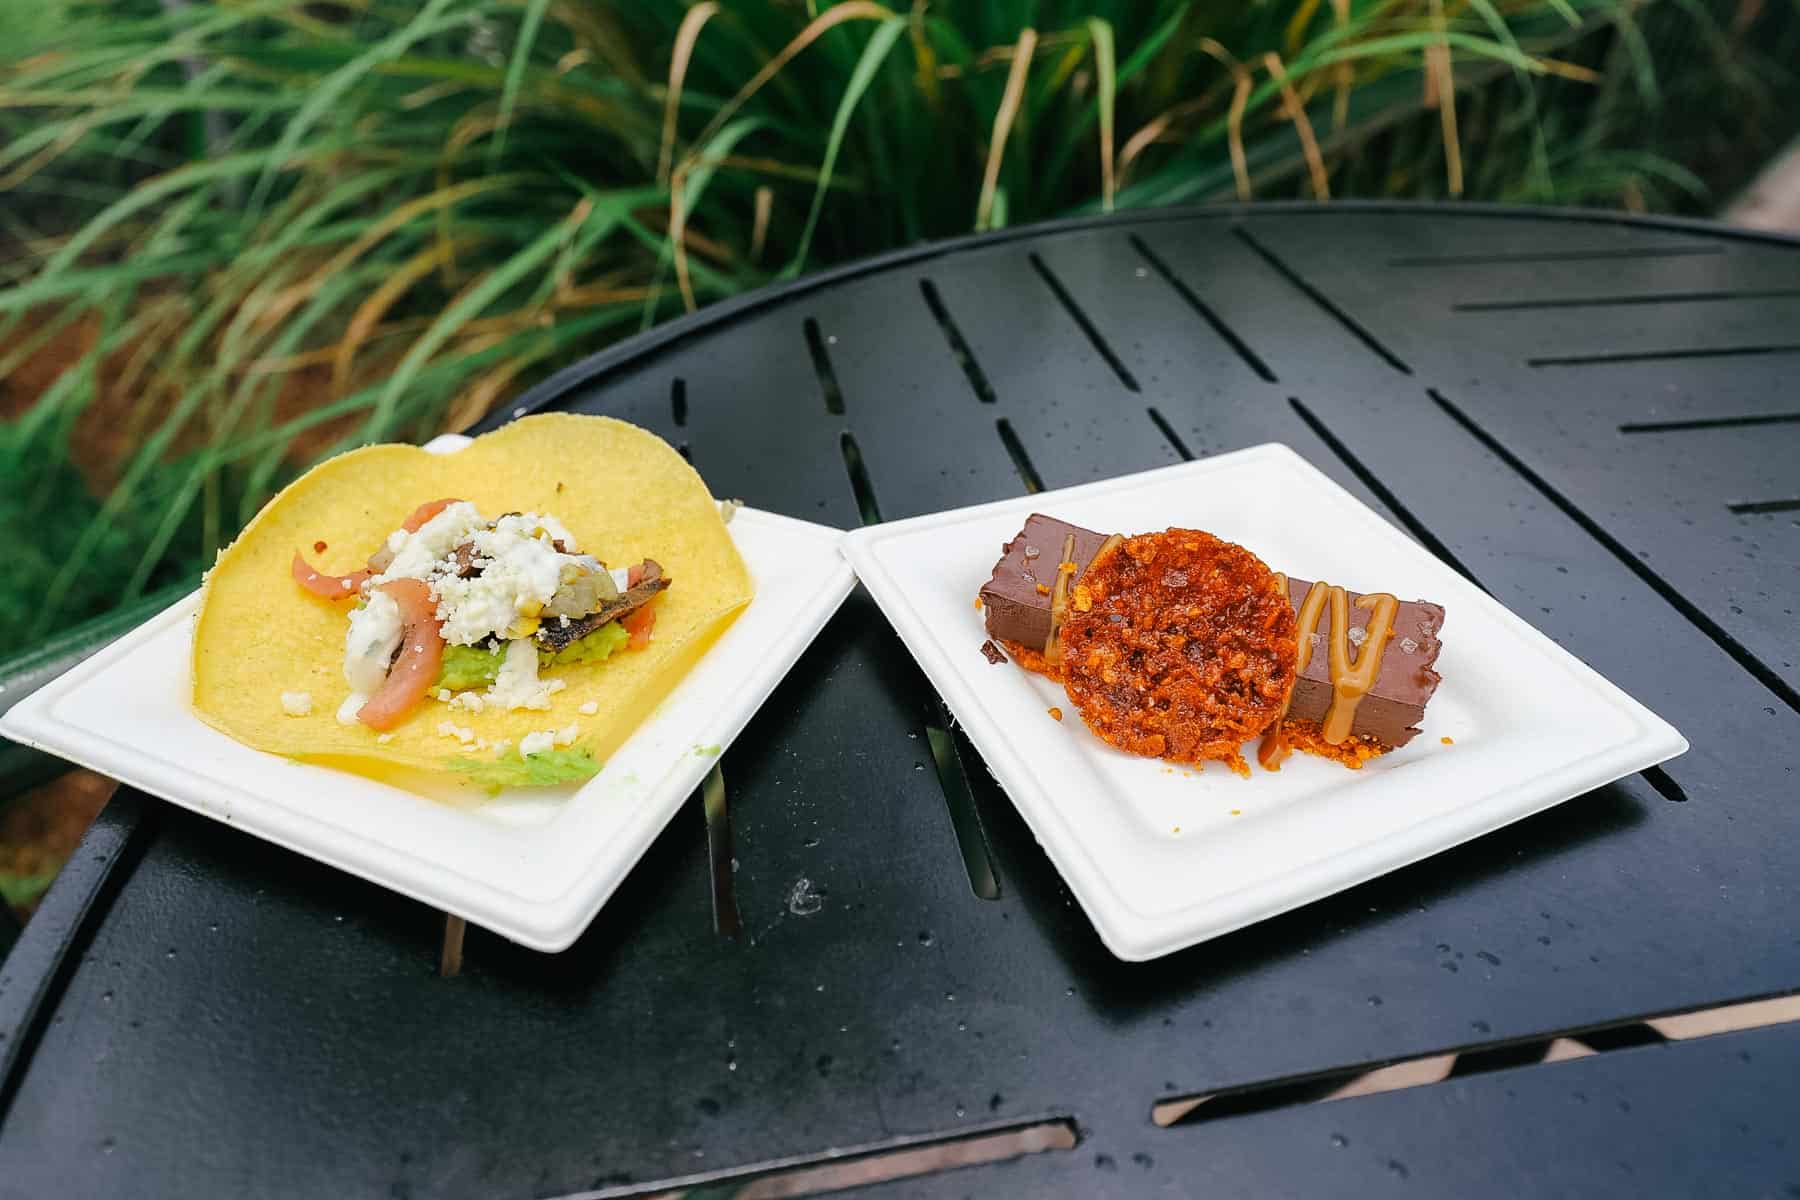 Flavors from Fire Menu Items at Epcot